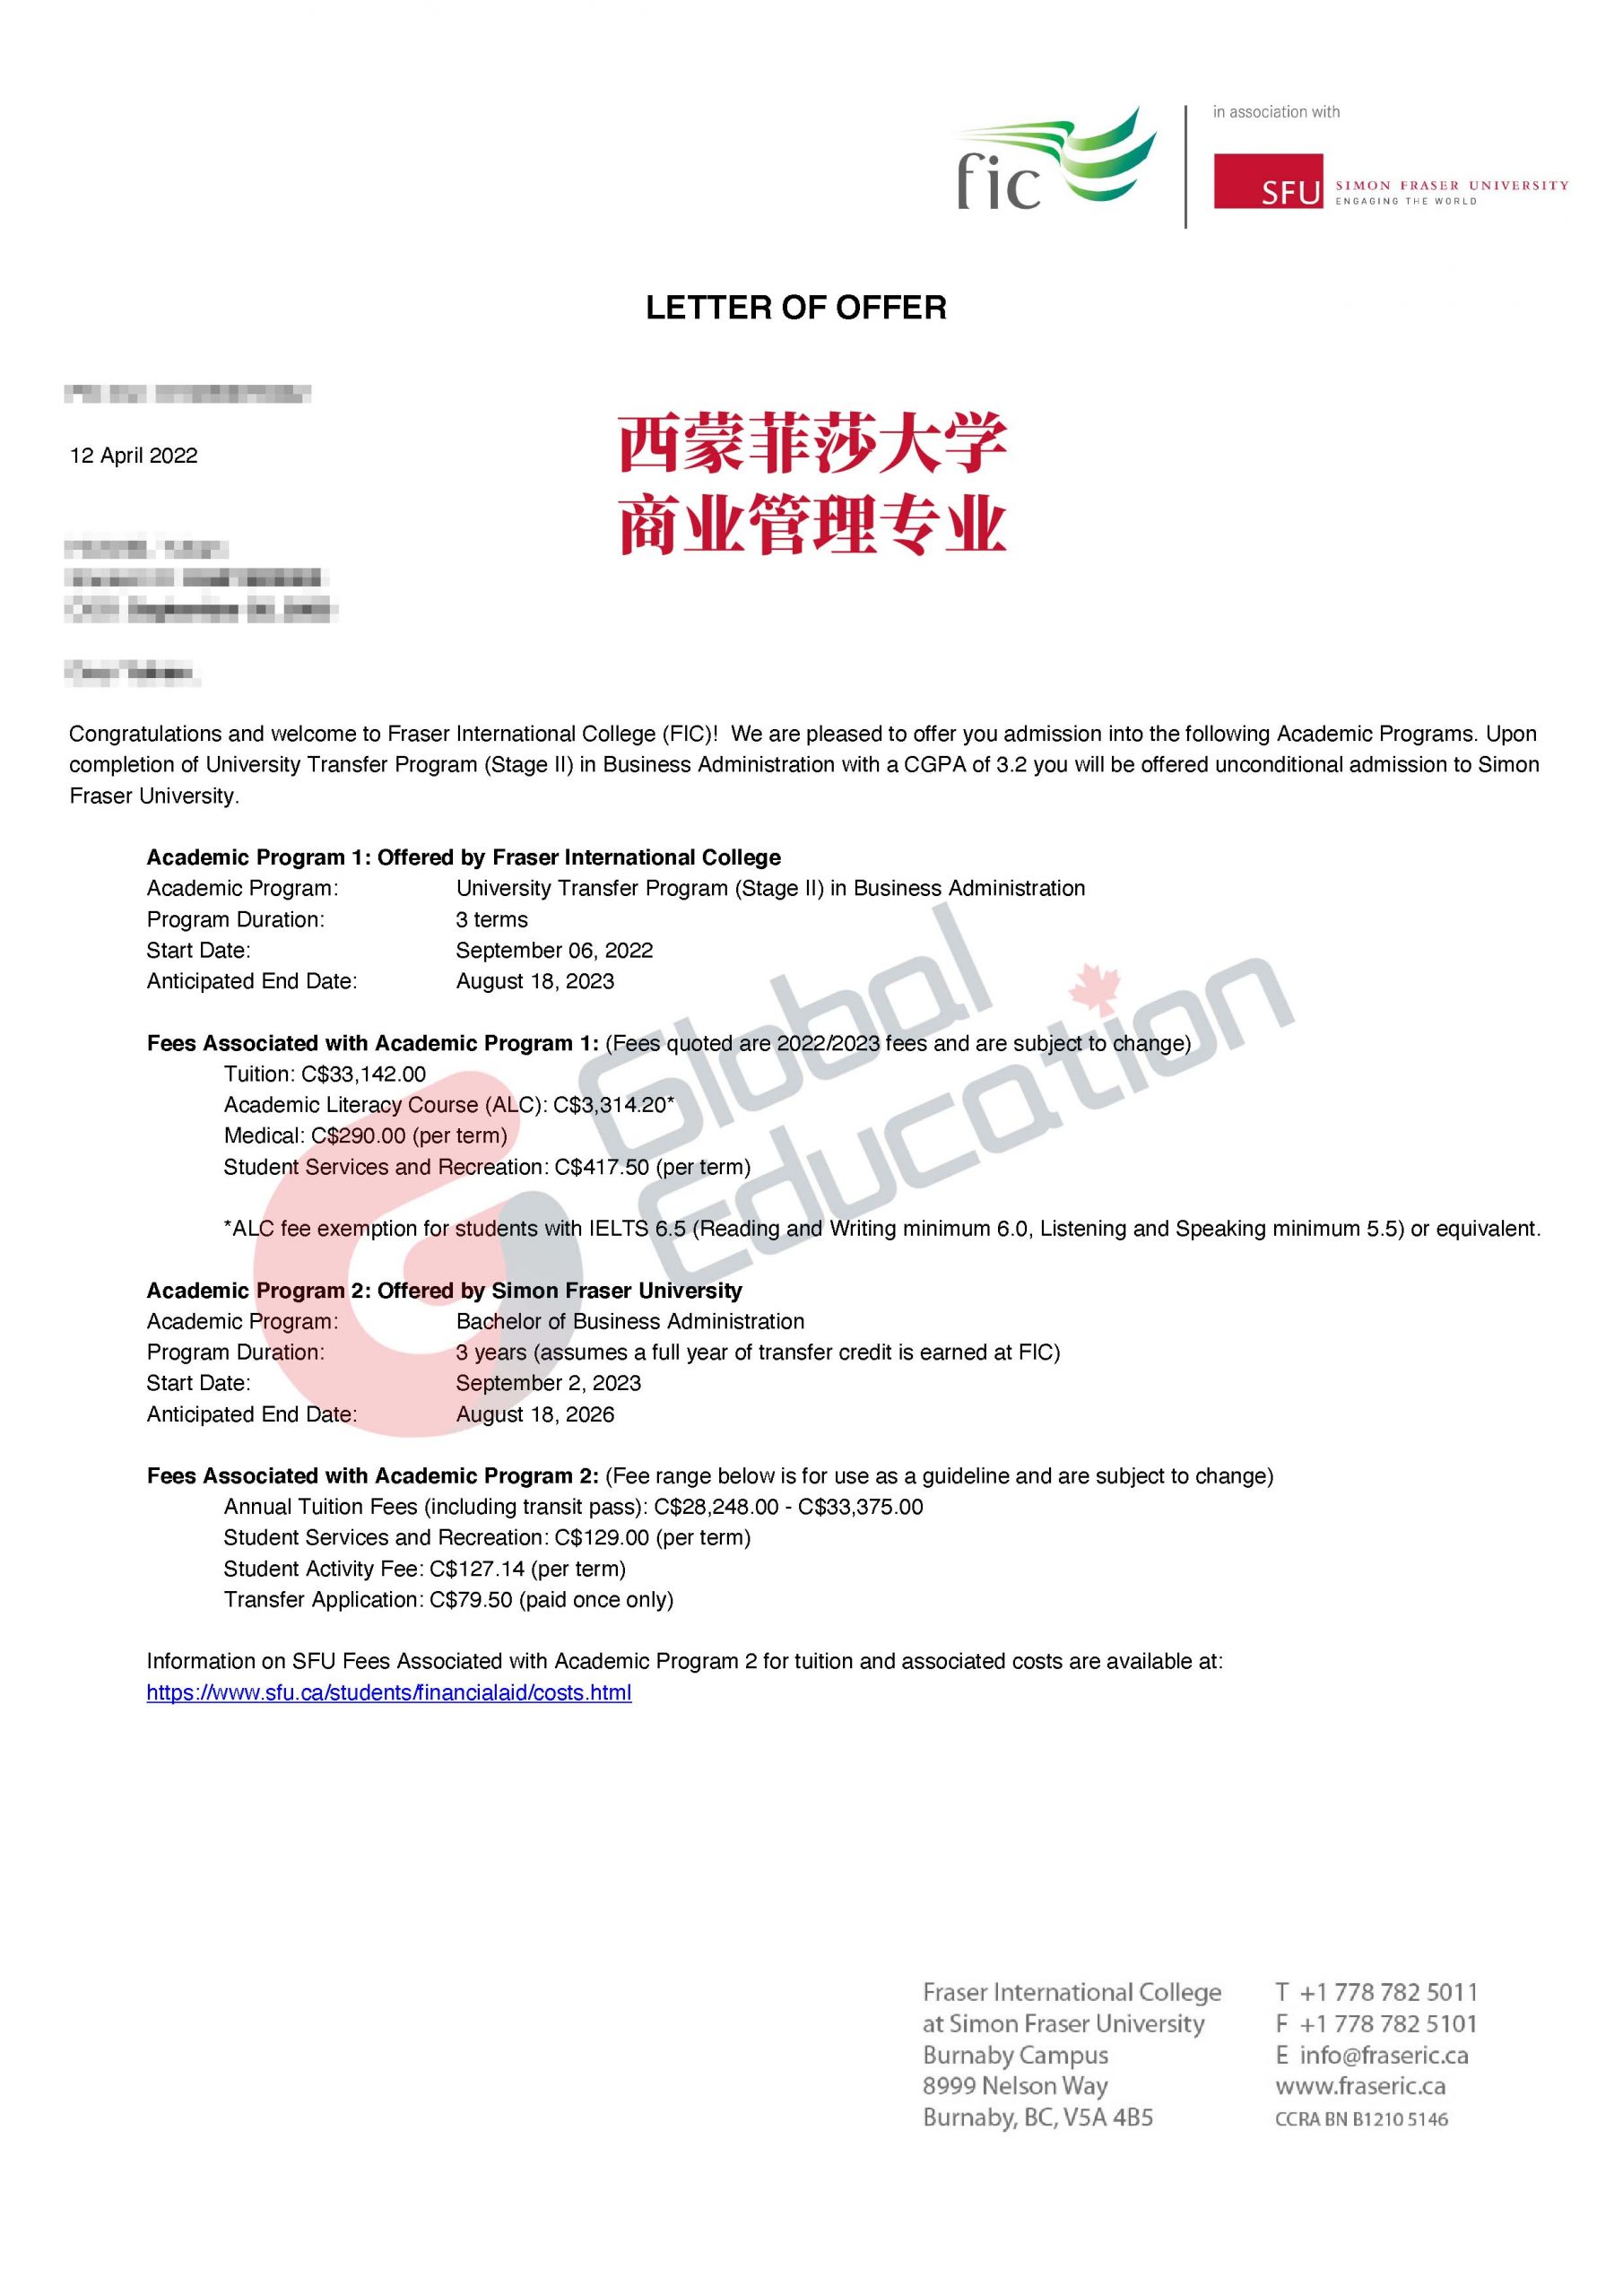 HUAY5D2203-FIC-UTP-Stage-ess-Administration-Offer1-1-scaled.jpg